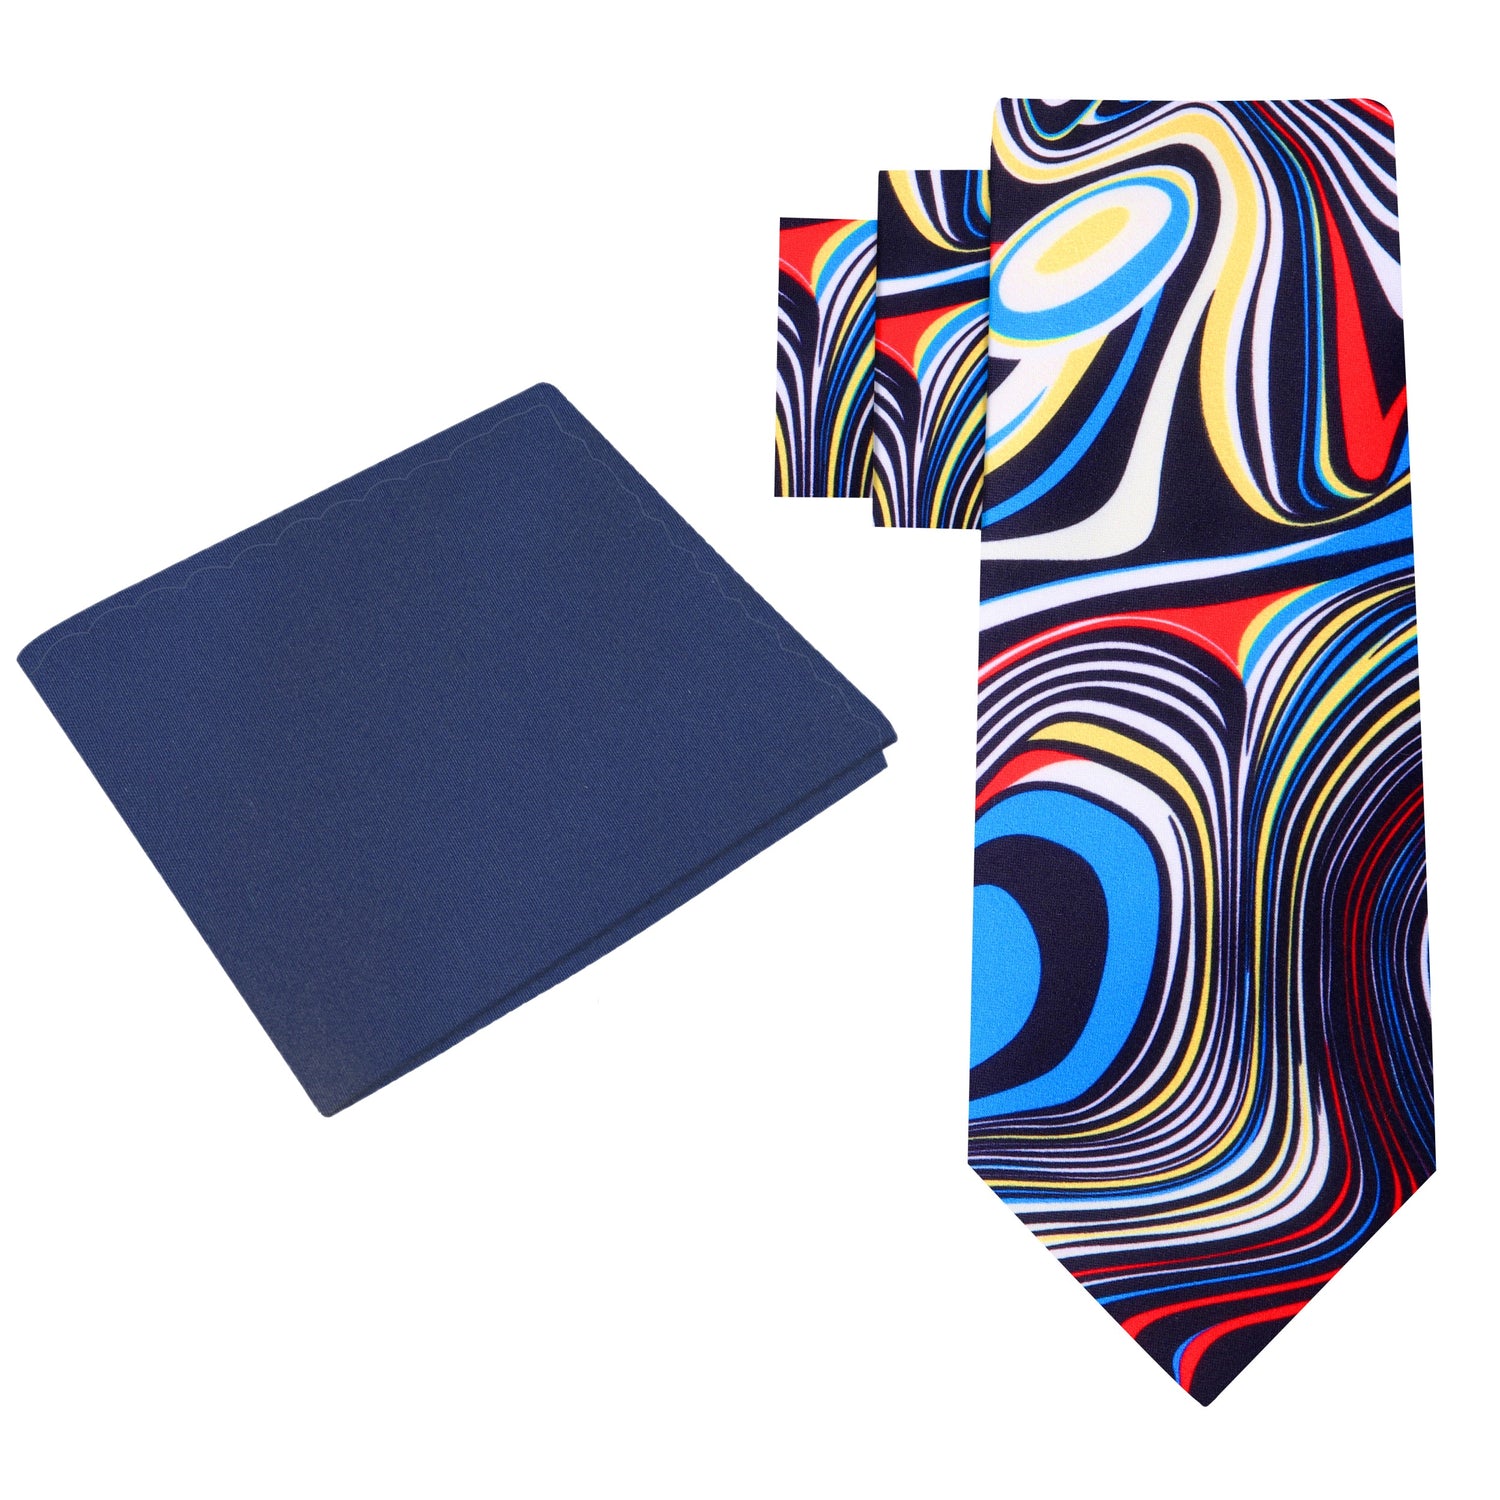 Alt View: Blue, Red, Yellow and White Abstract Tie and Blue Square